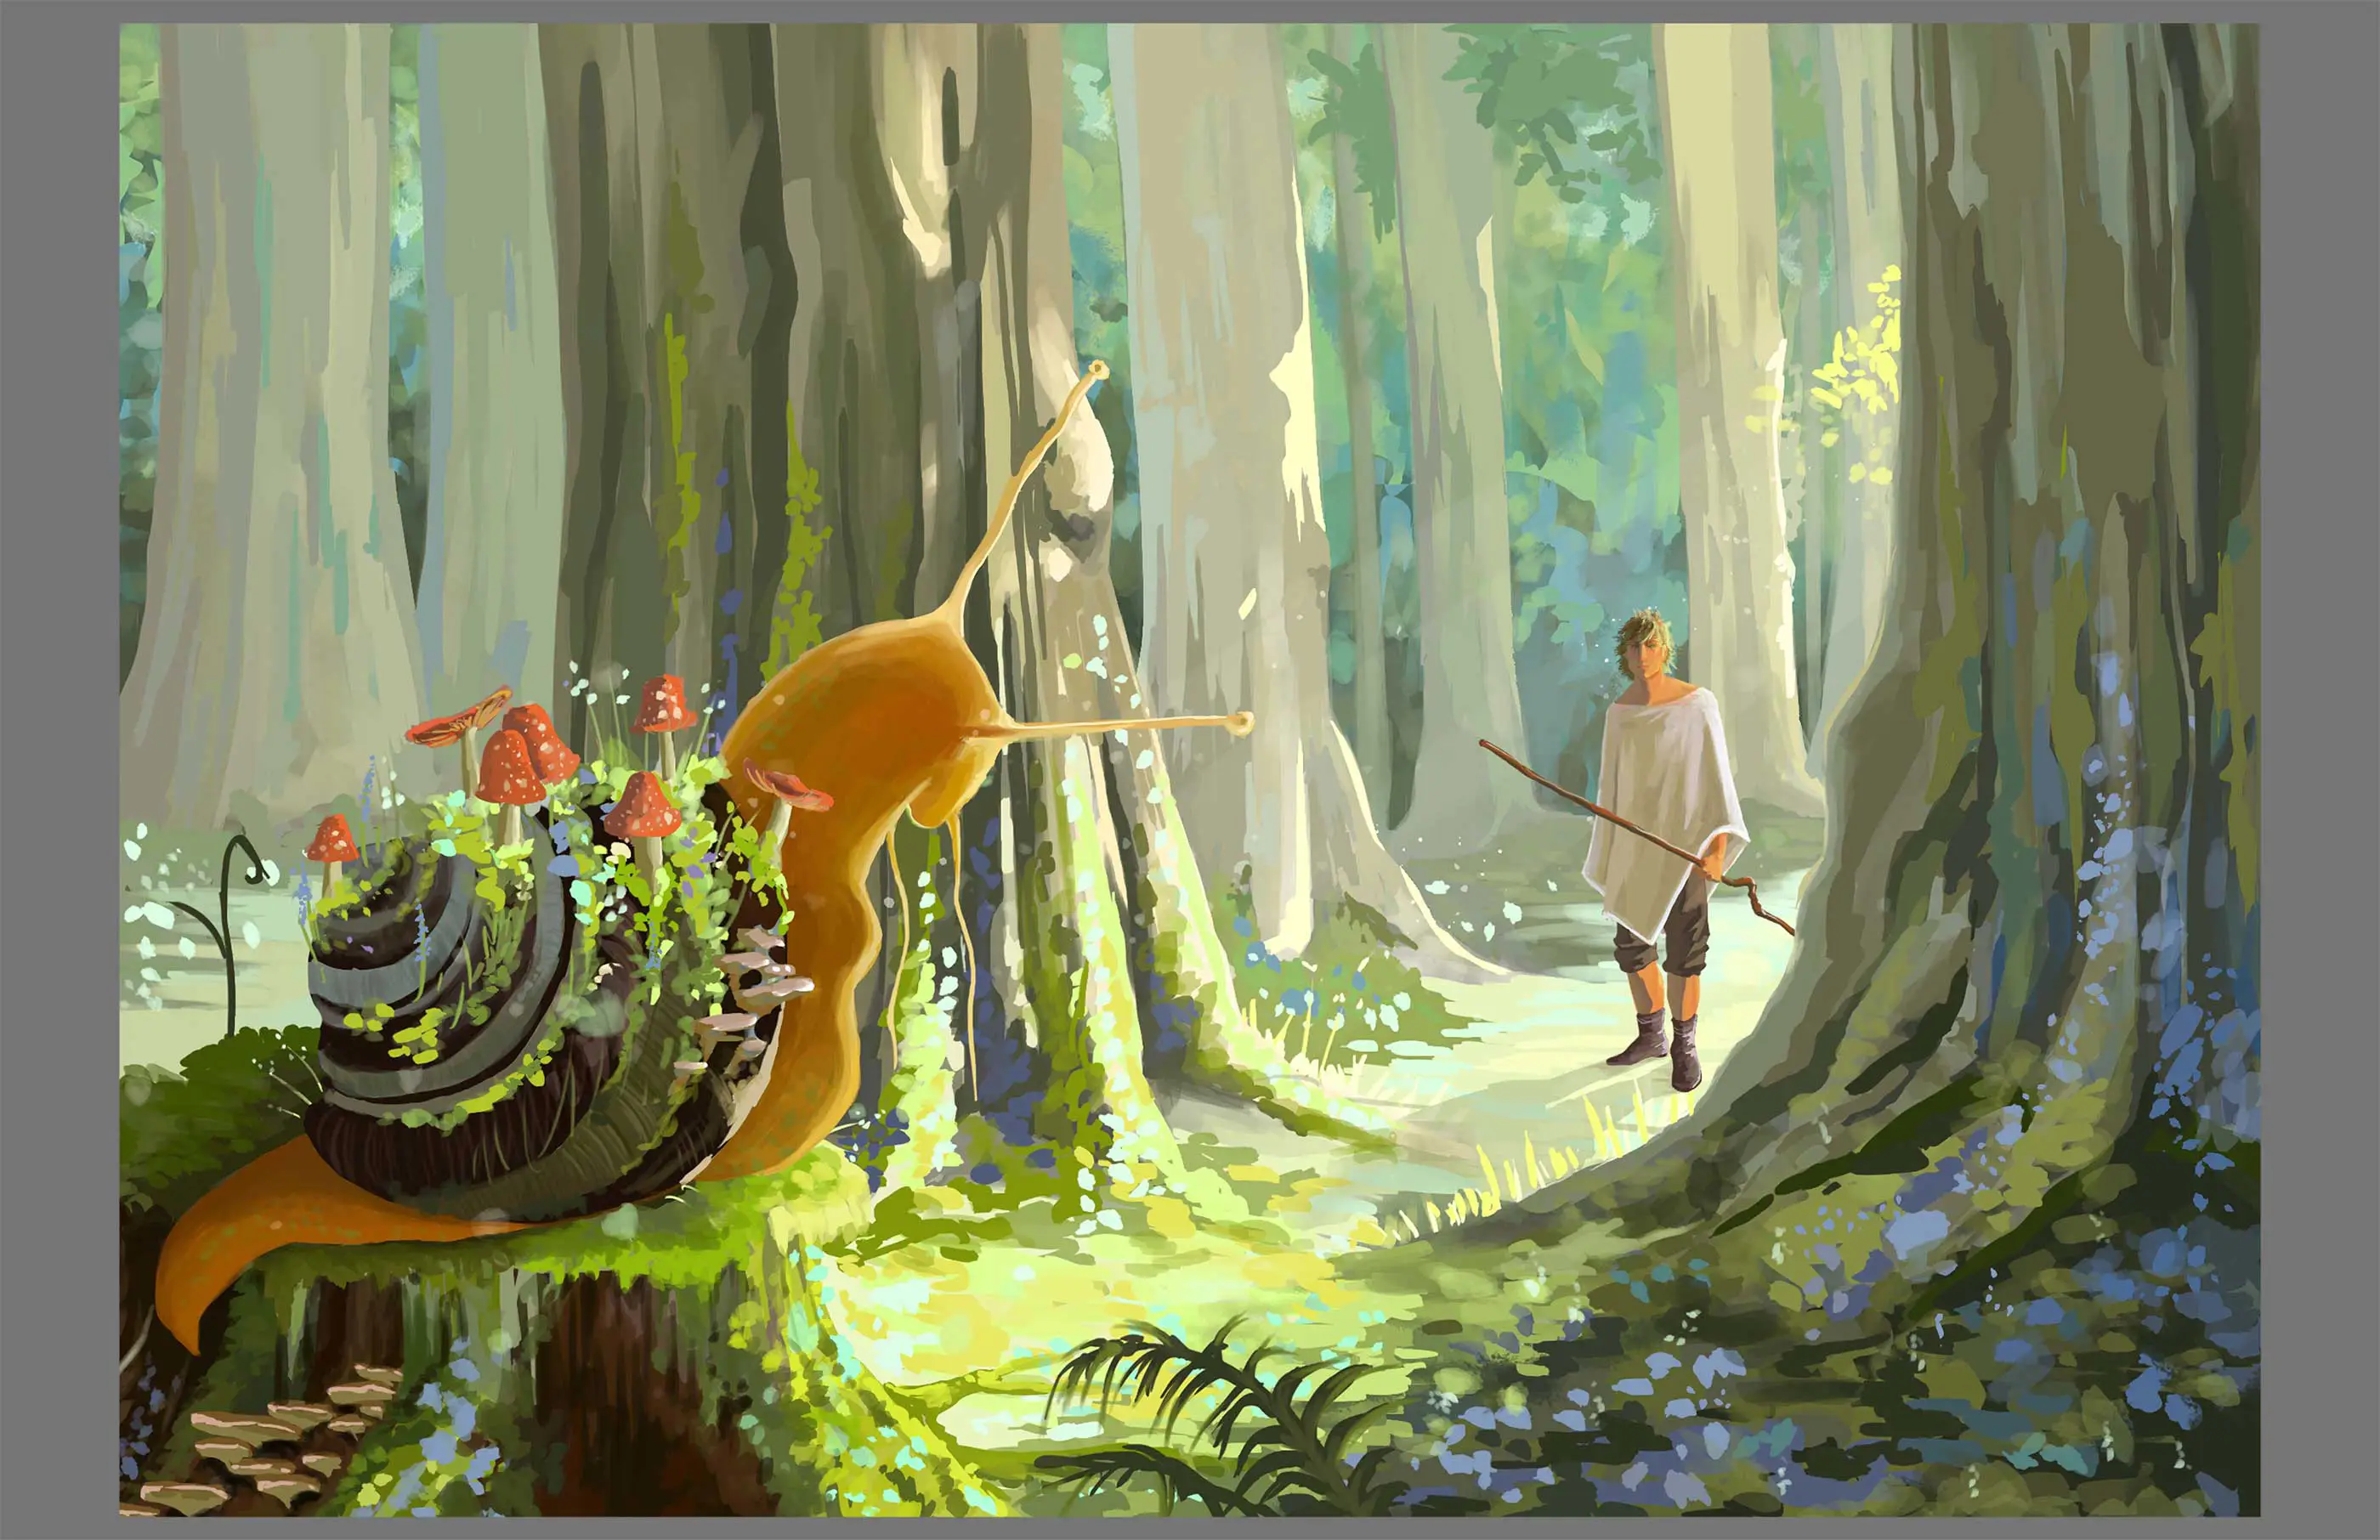 A painting of a person discovering a large snail.